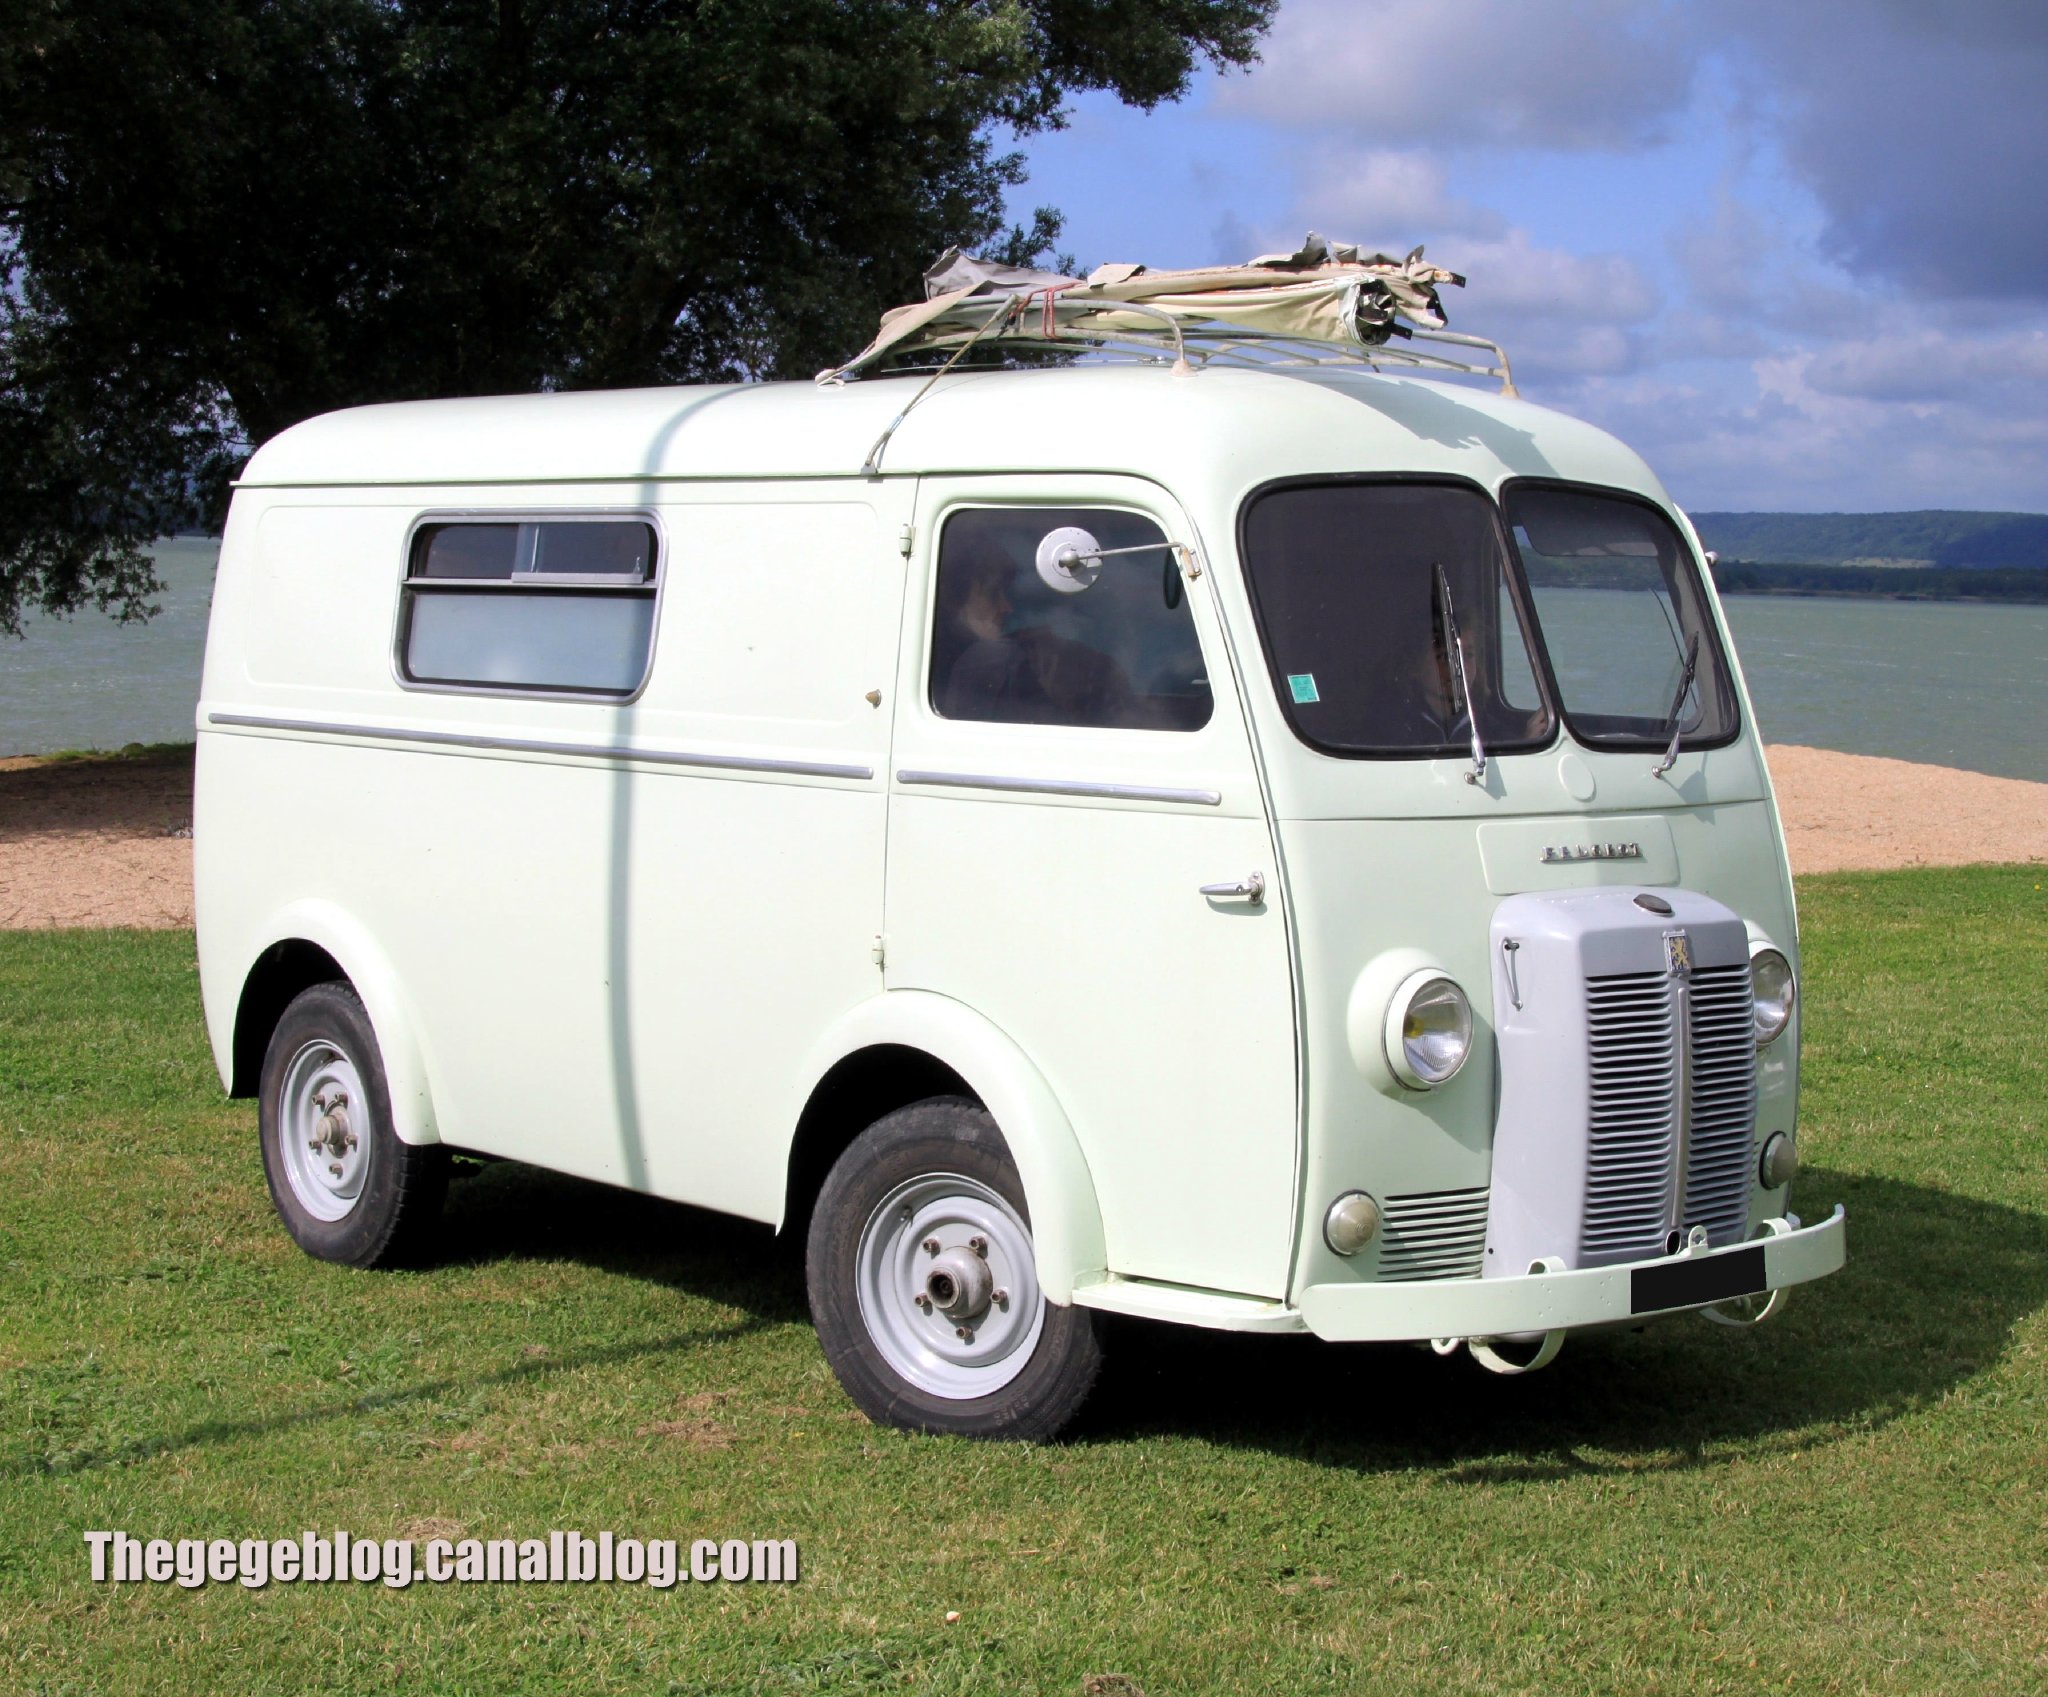 peugeot, D4a, Classic, Van, Delivery, Camionnette, French Wallpaper